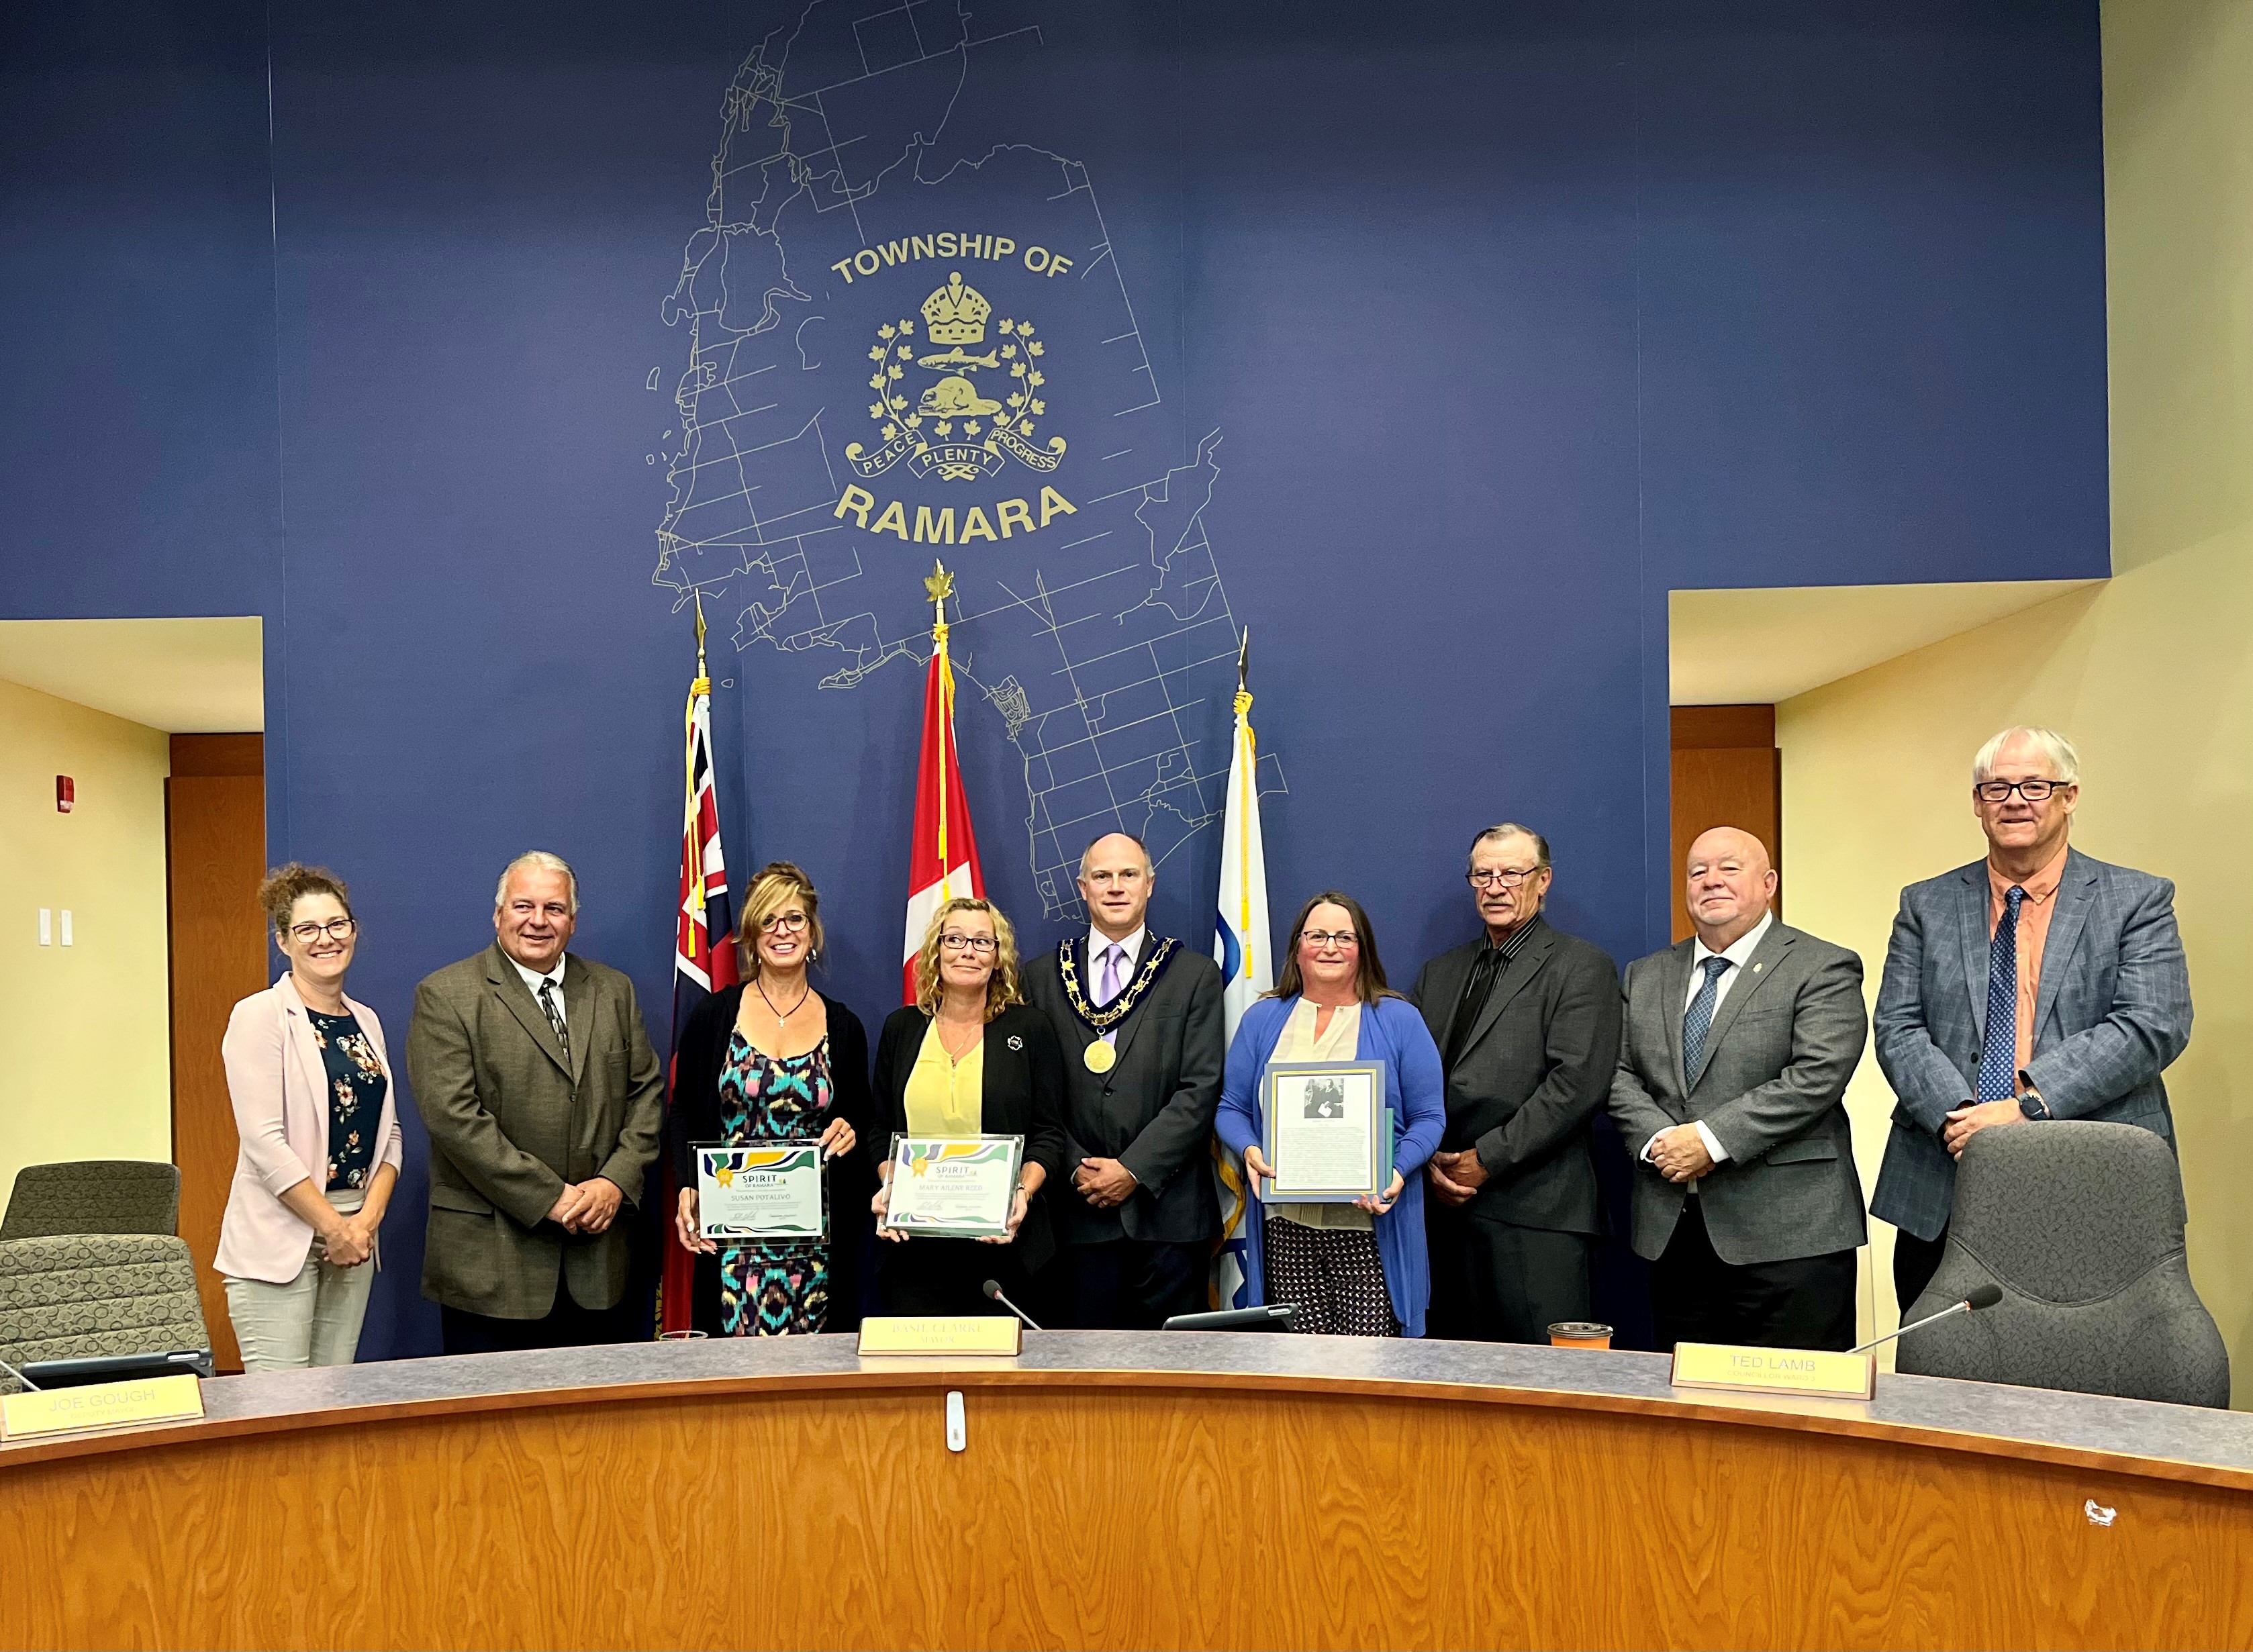 Members of Council with award recipients